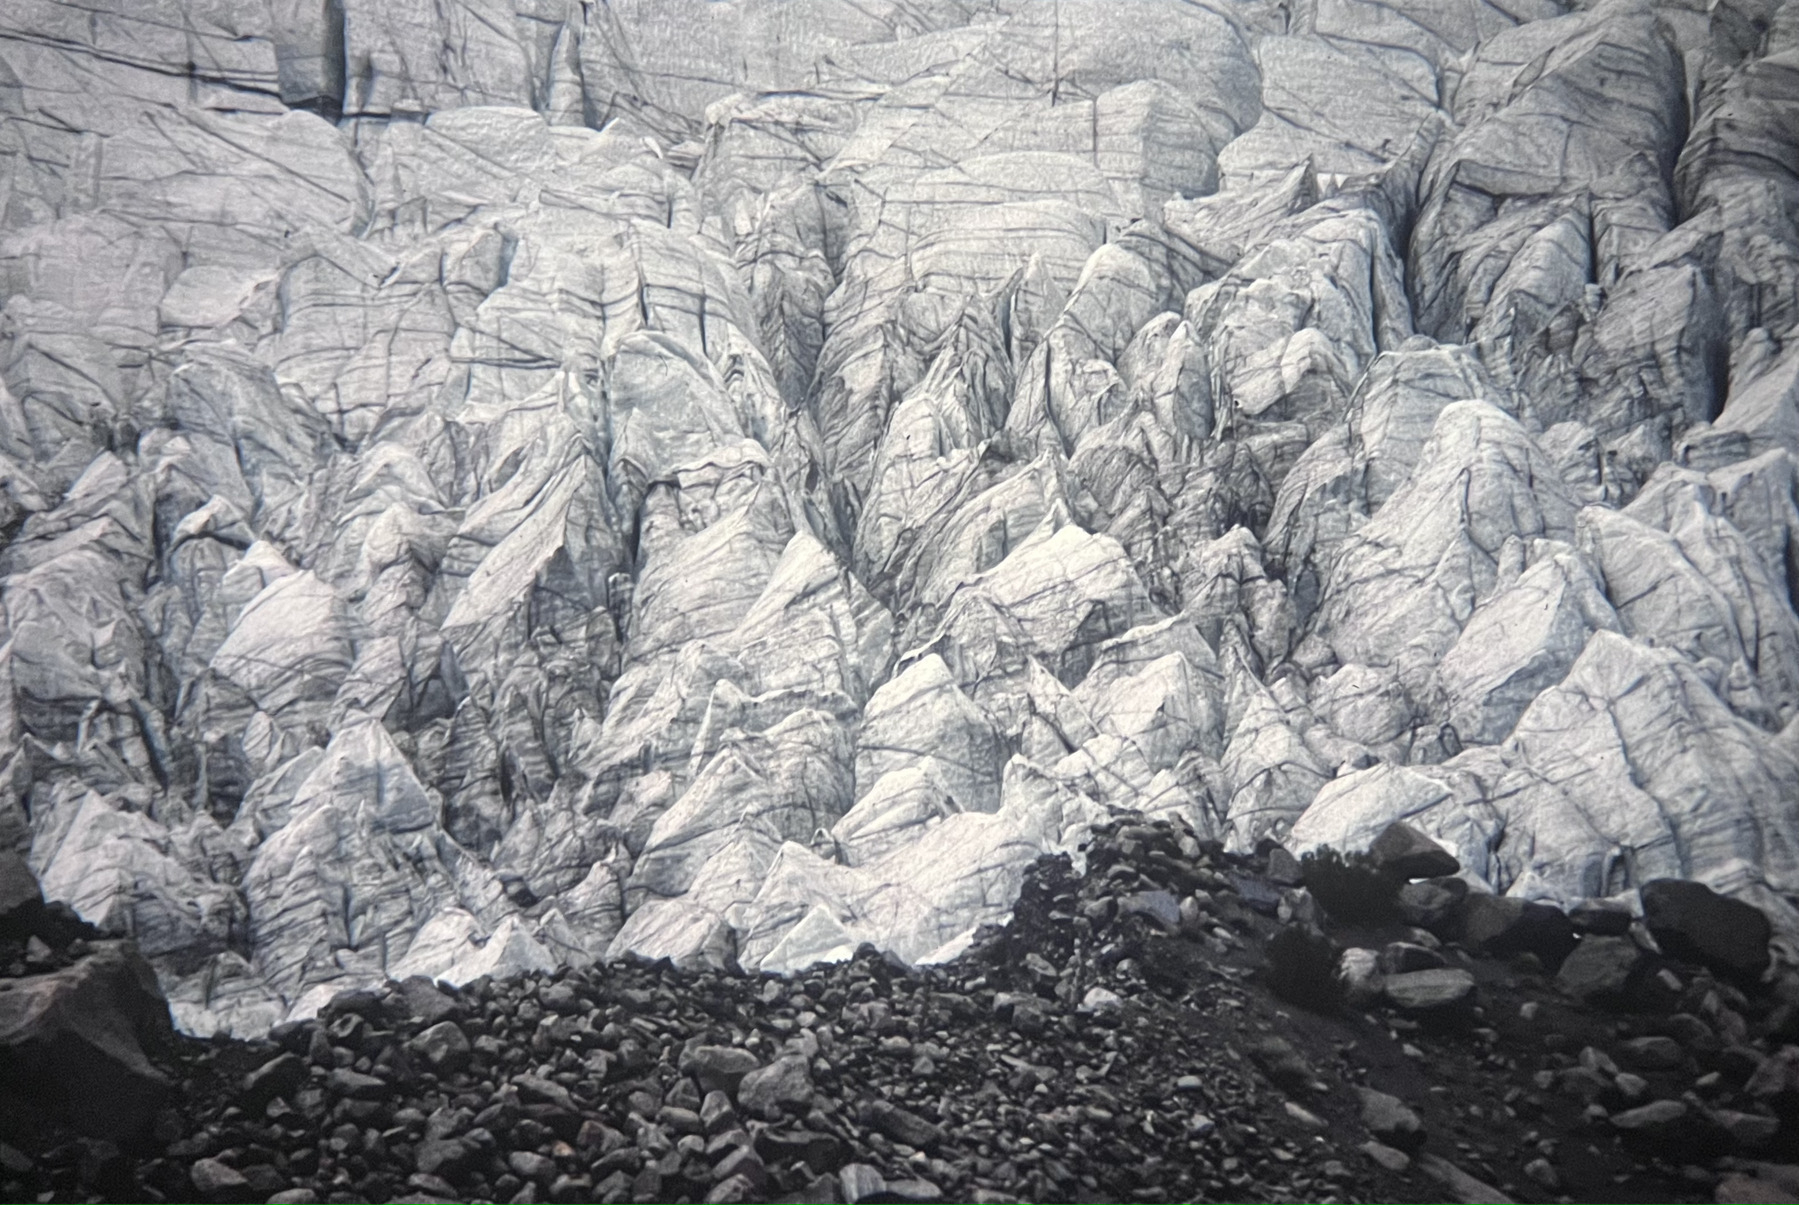 The terminus of the Batura Glacier in Pakistan showing a wall of ice with rocks and boulders in the foreground.